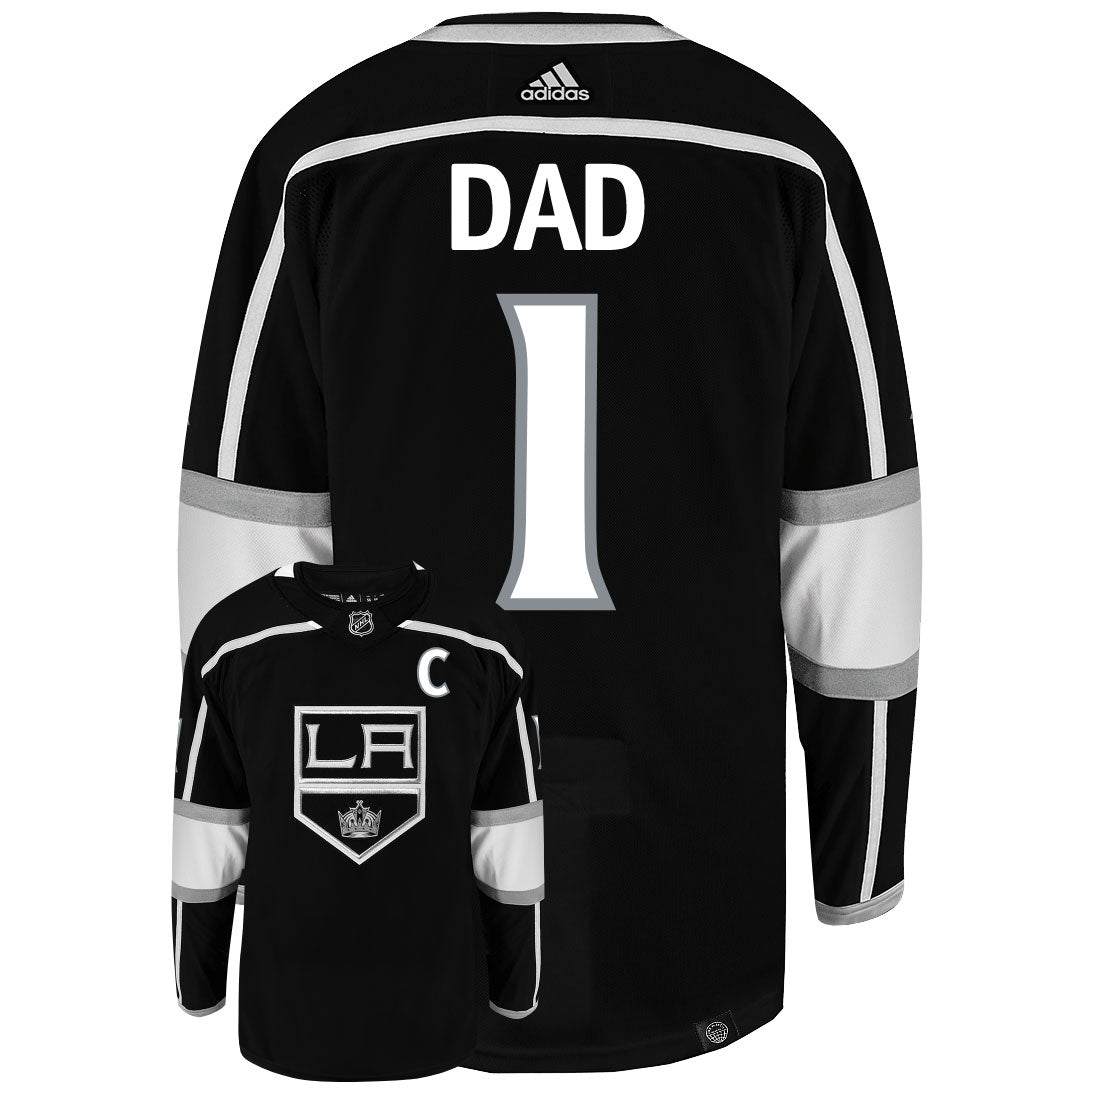 Los Angeles Kings Dad Number One Adidas Primegreen Authentic NHL Hockey Jersey - Back/Front View